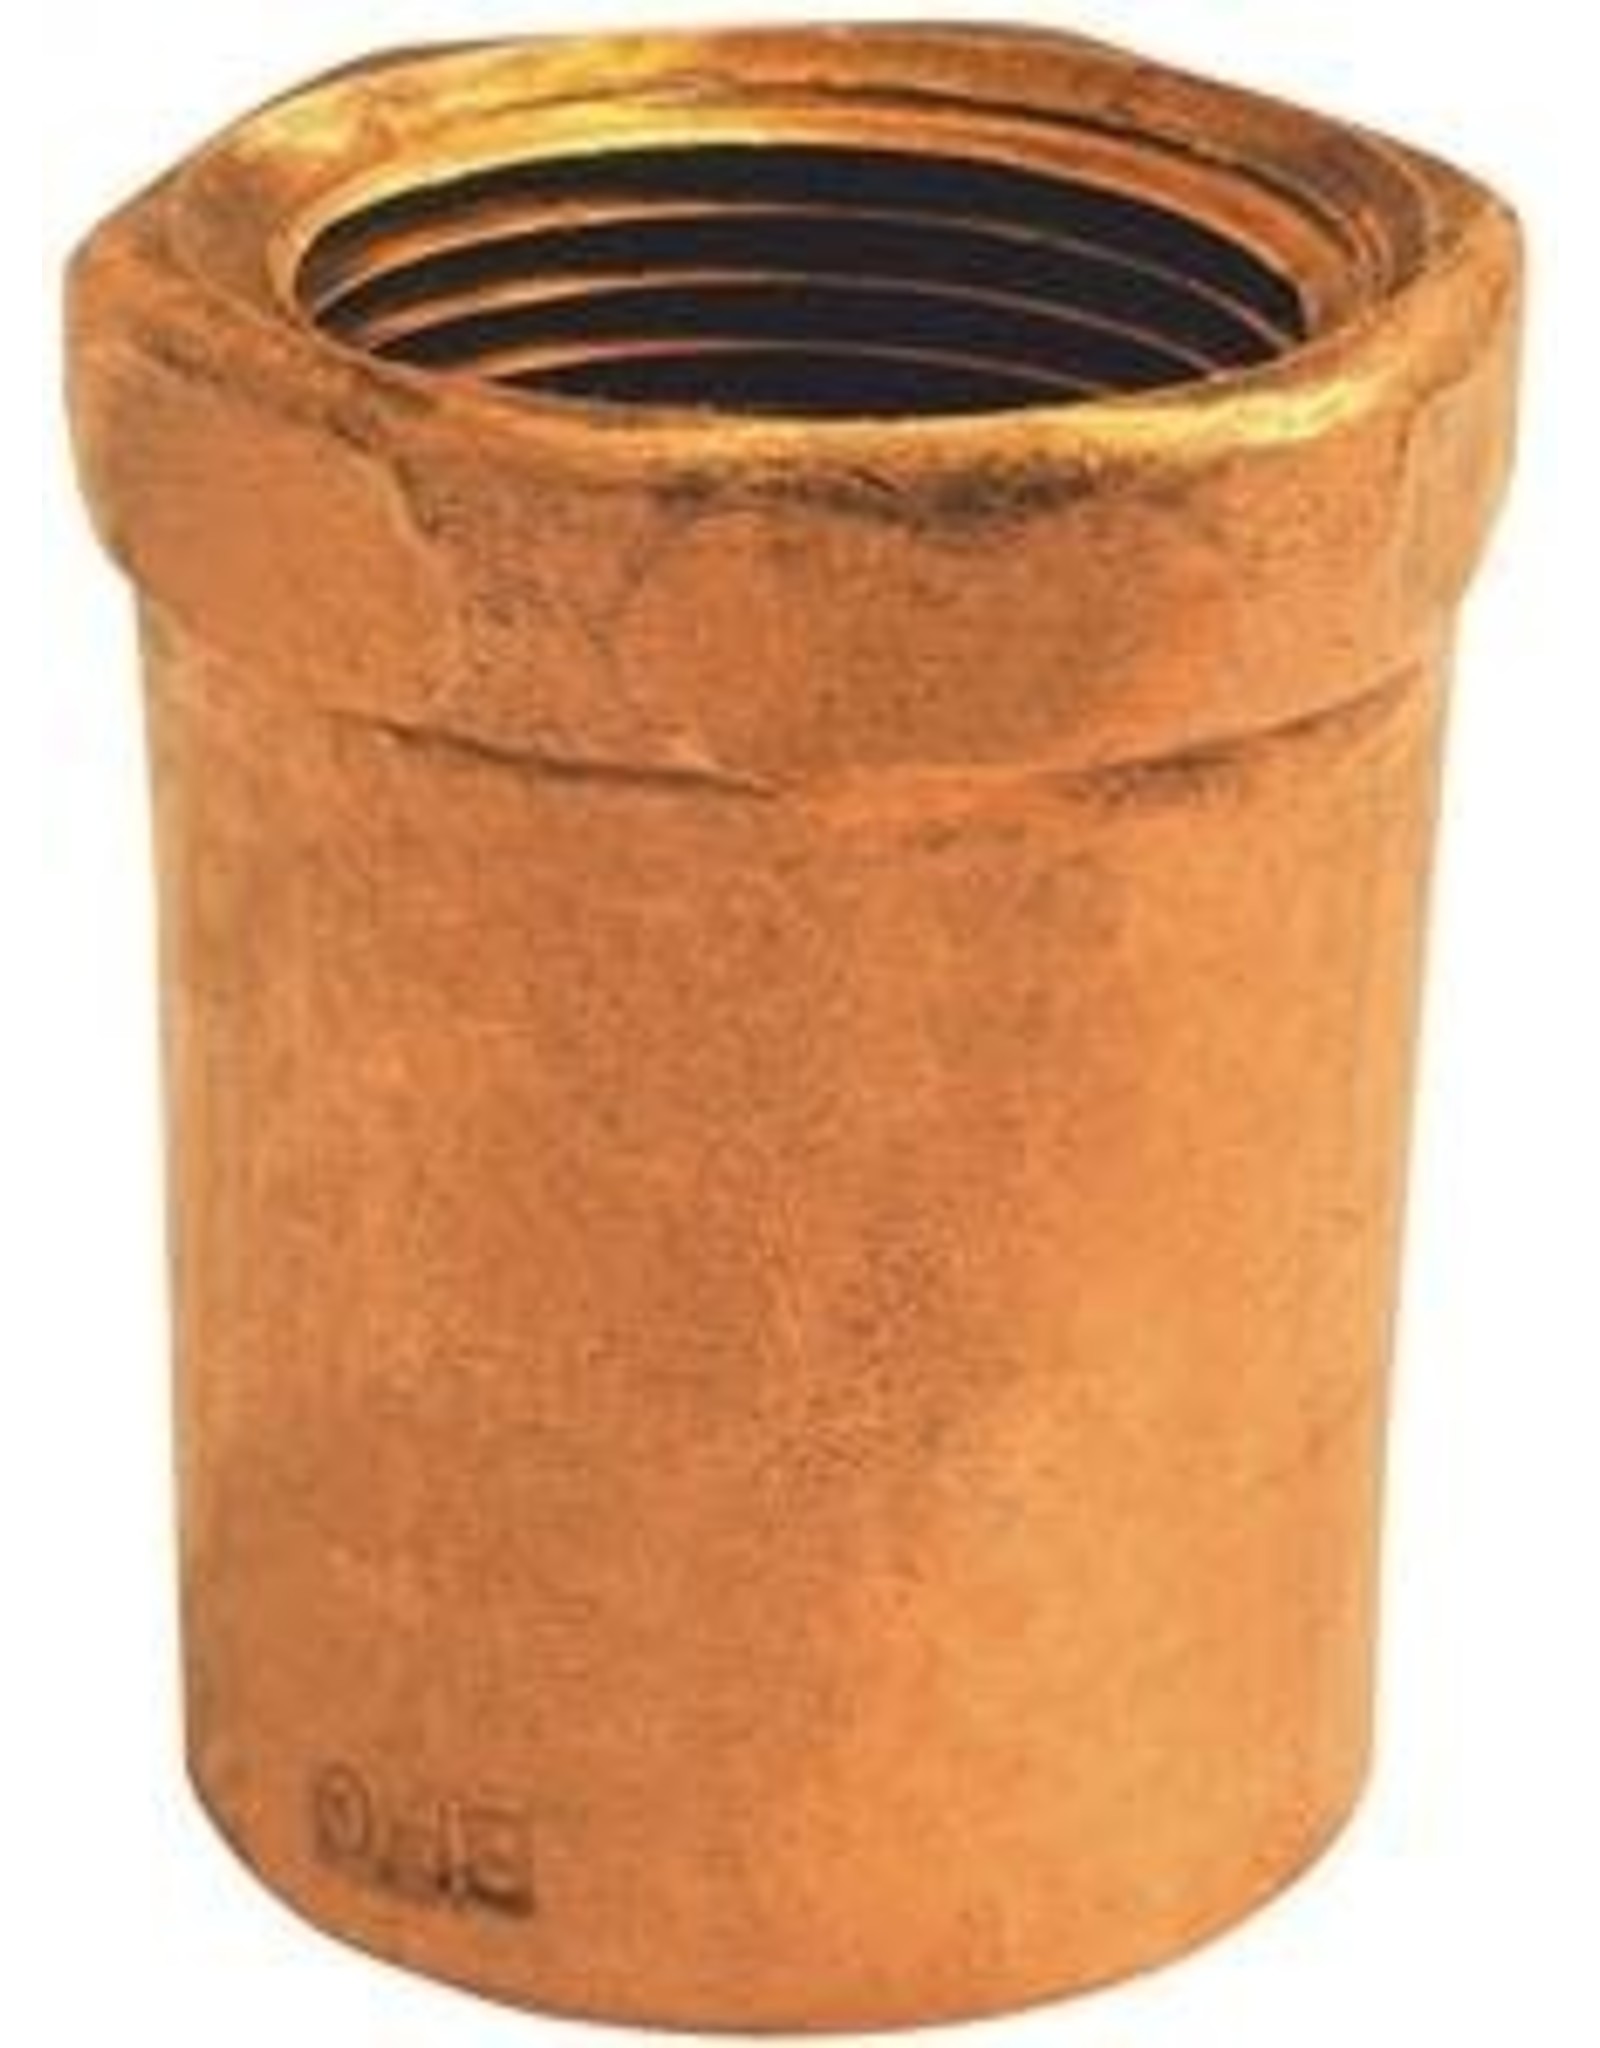 Elkhart EPC 103 Series 30150 Pipe Adapter, 3/4 in, Sweat x FNPT, Copper